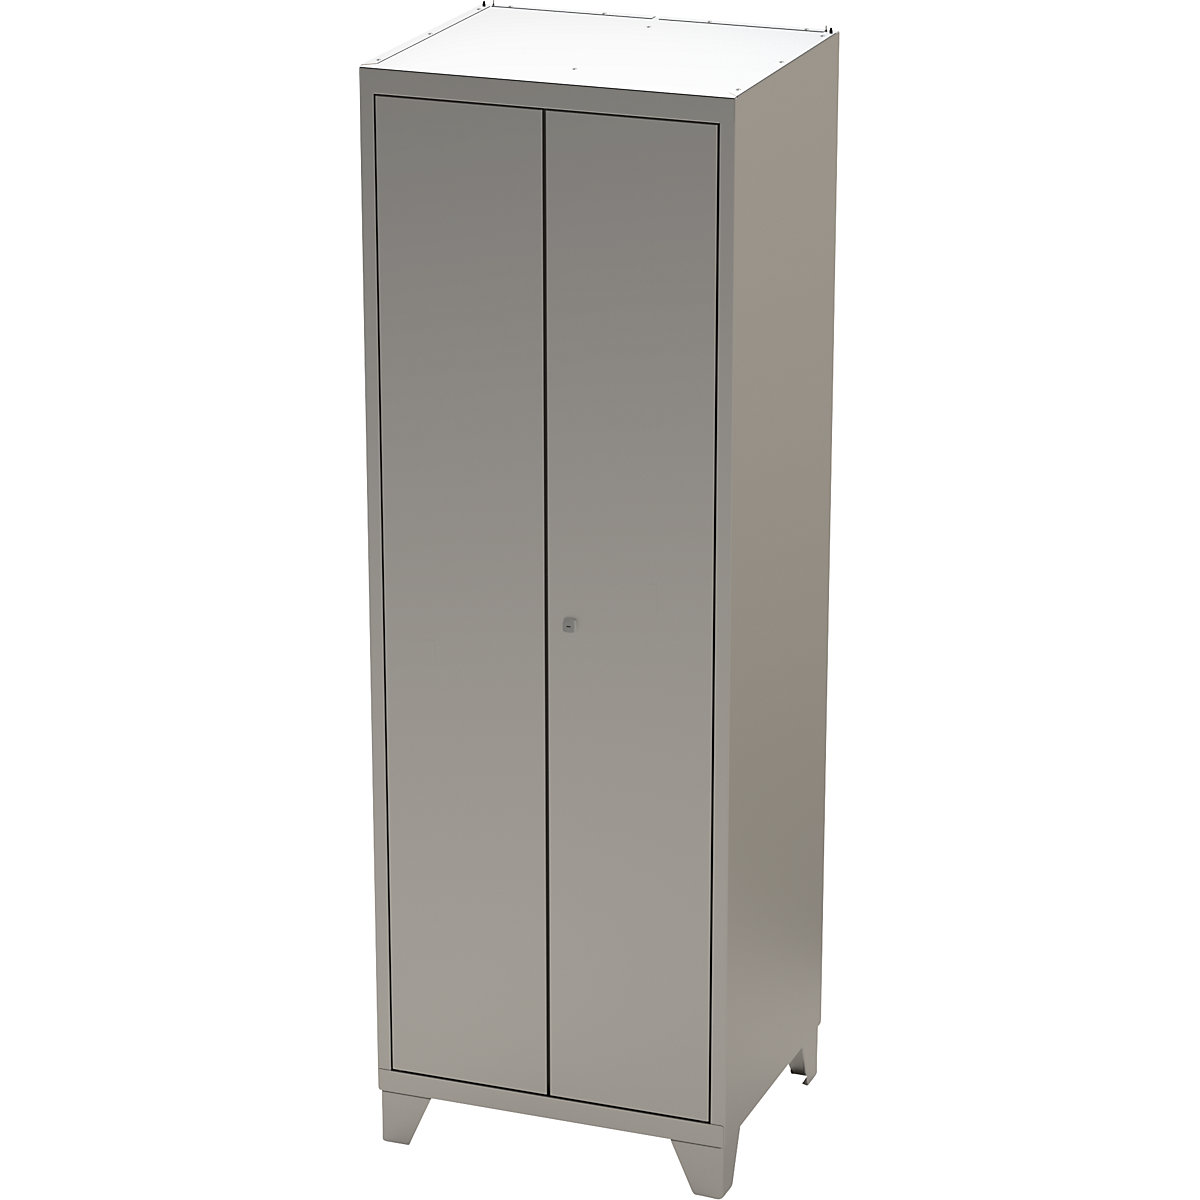 Stainless steel cabinet with stud feet, wardrobe with 2 wardrobe compartments, height x width x depth 1800 x 600 x 500 mm